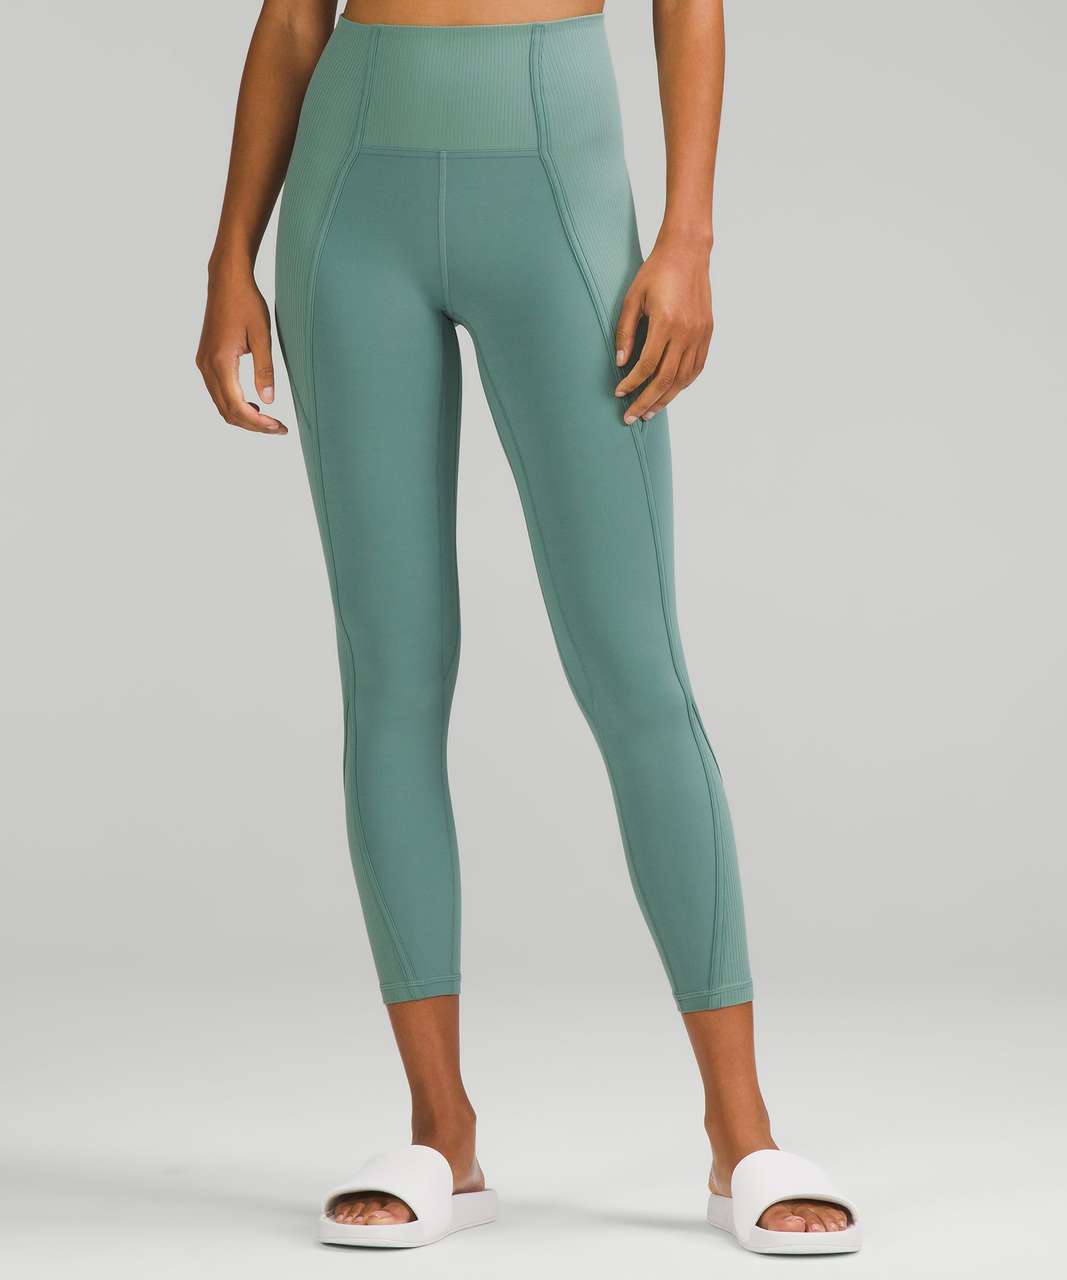 NWT Lululemon Align Pant with Pockets Size 4 Tidewater Teal 25